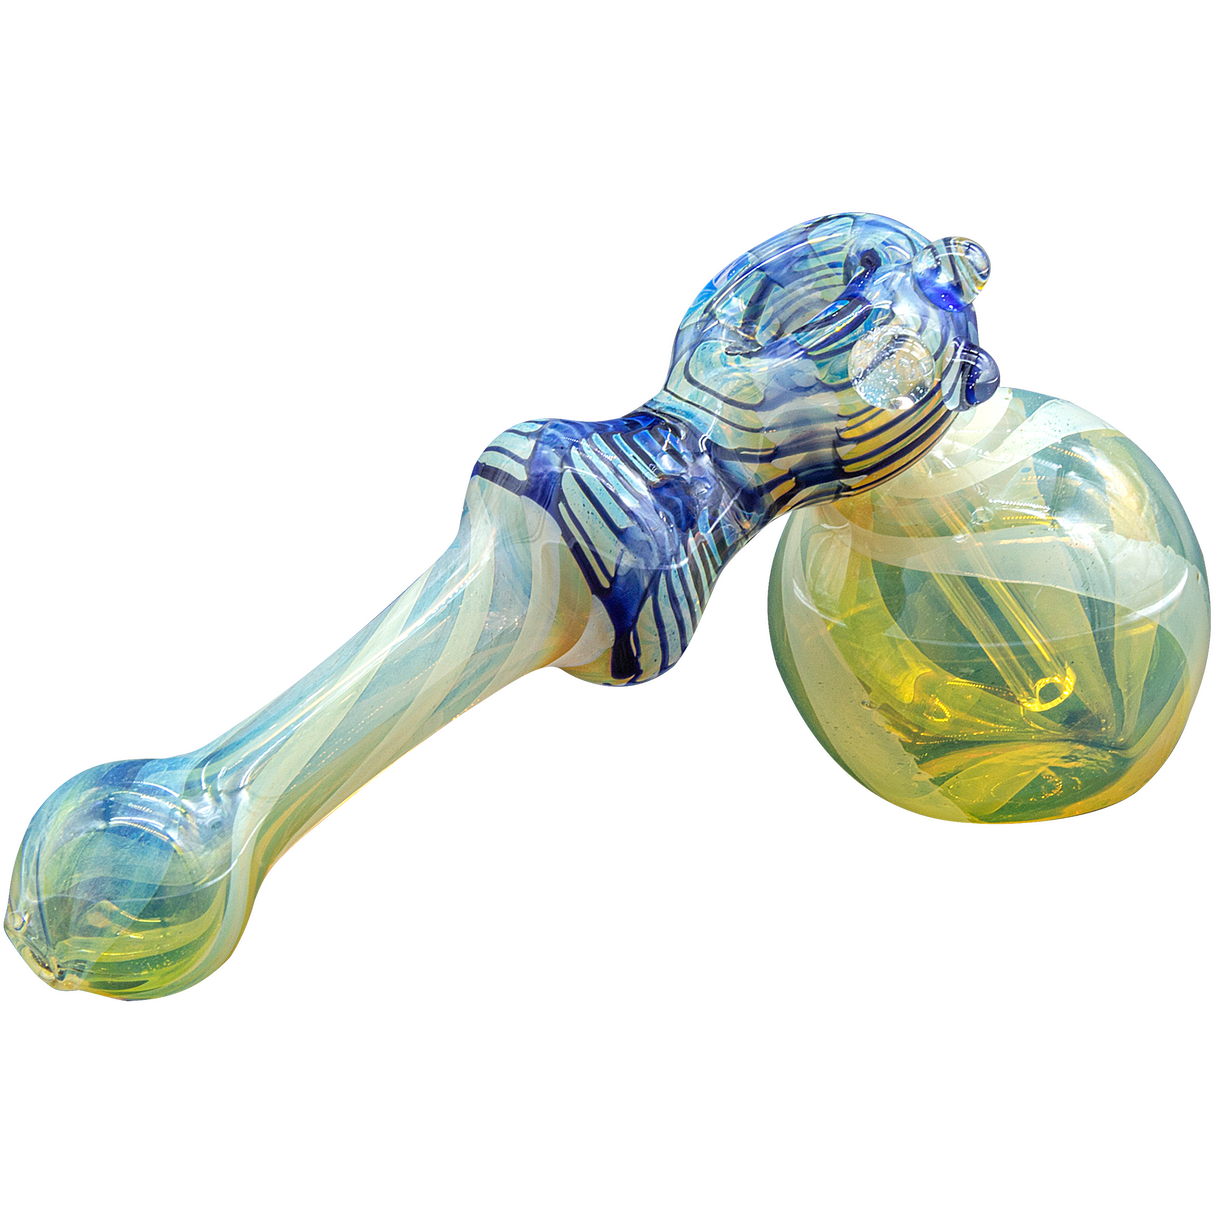 LA Pipes Raked Hammer Fumed Bubbler Pipe in Blue and Yellow - Side View